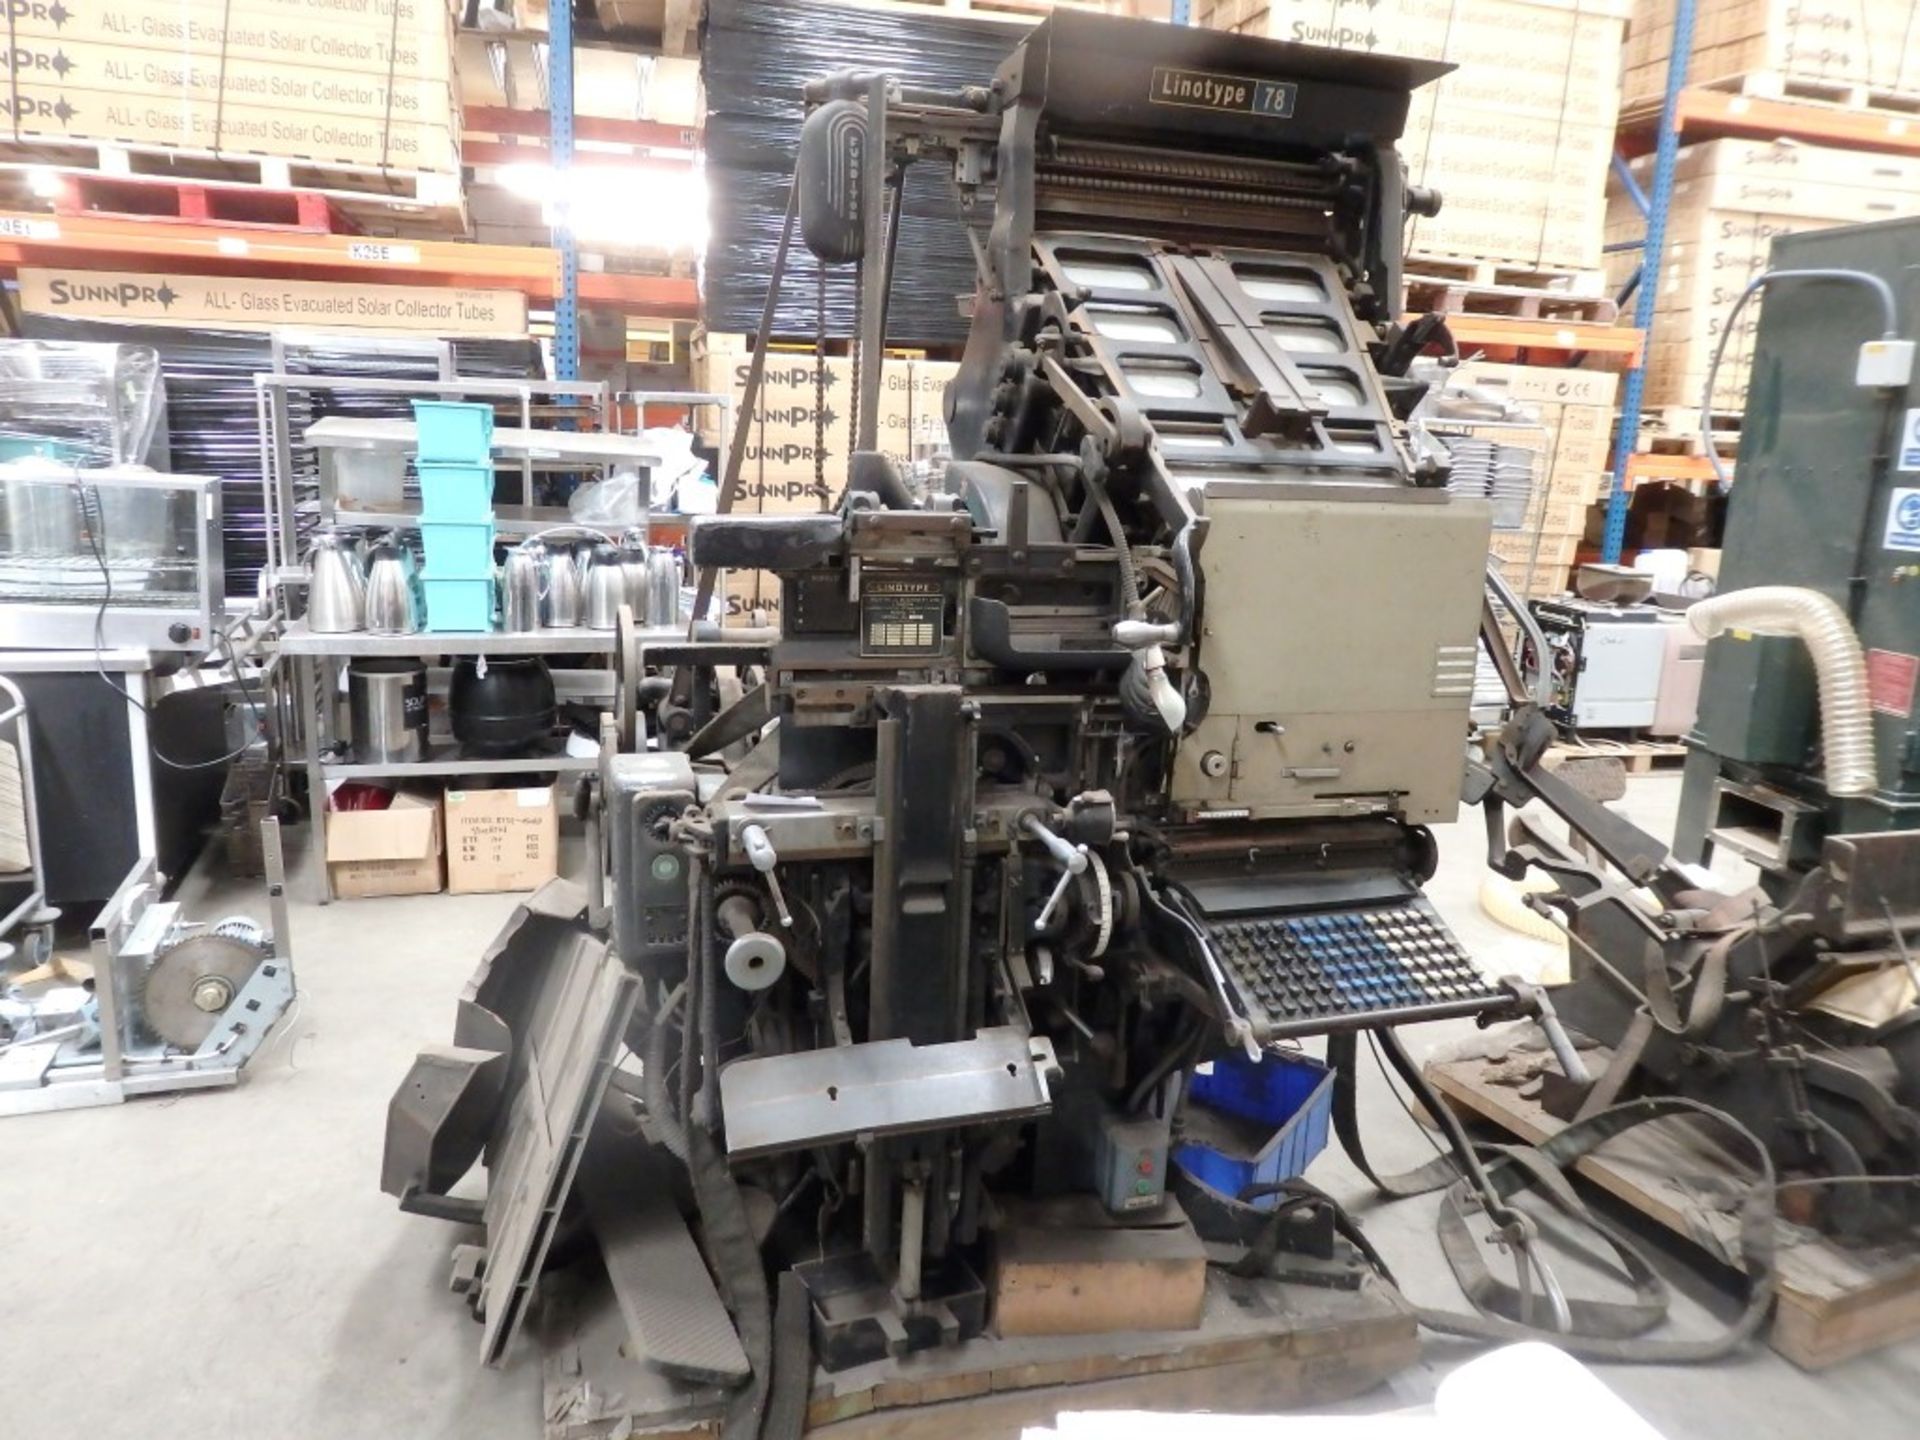 1 x Original Linotype Model 78 Printing Press - Untested In Good Aesthetic Condition - Fantastic - Image 5 of 23